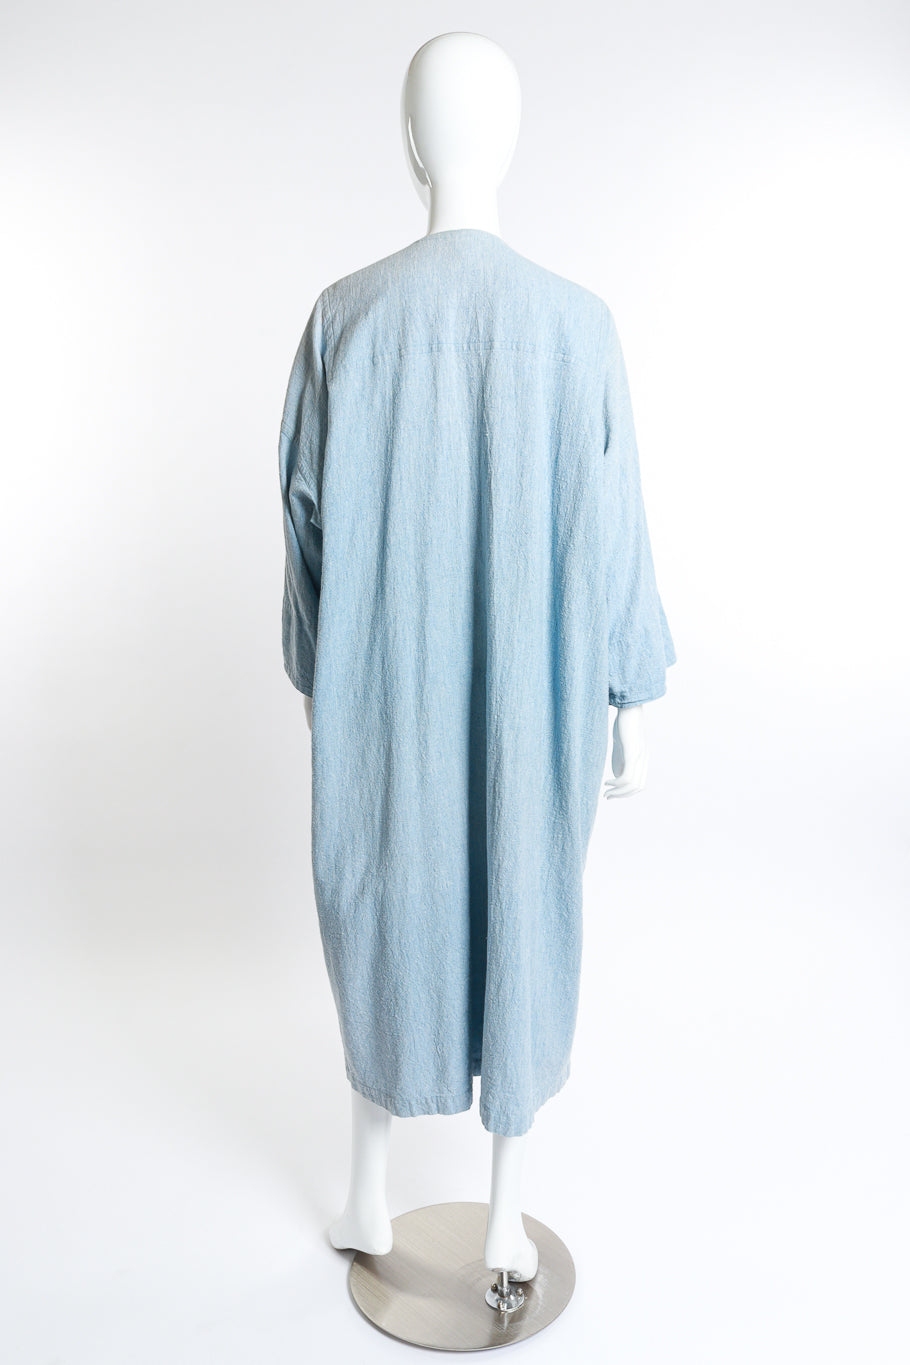 Vintage Issey Miyake plantation raw cotton duster rear view as worn on mannequin @RECESS LA